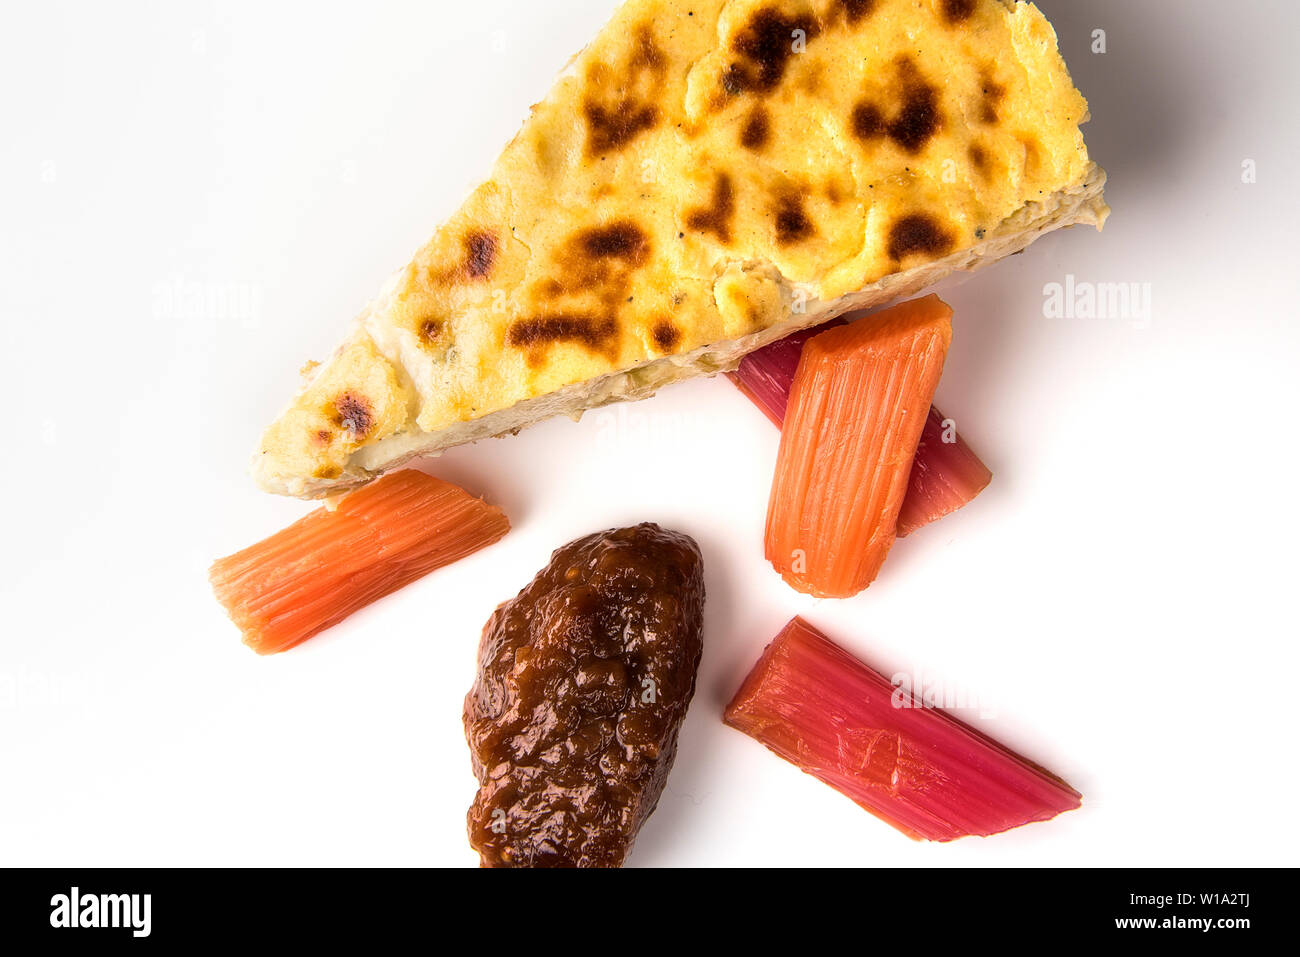 savoury baked cheesecake with pickled rhubarb and rhubarb chutney Stock Photo